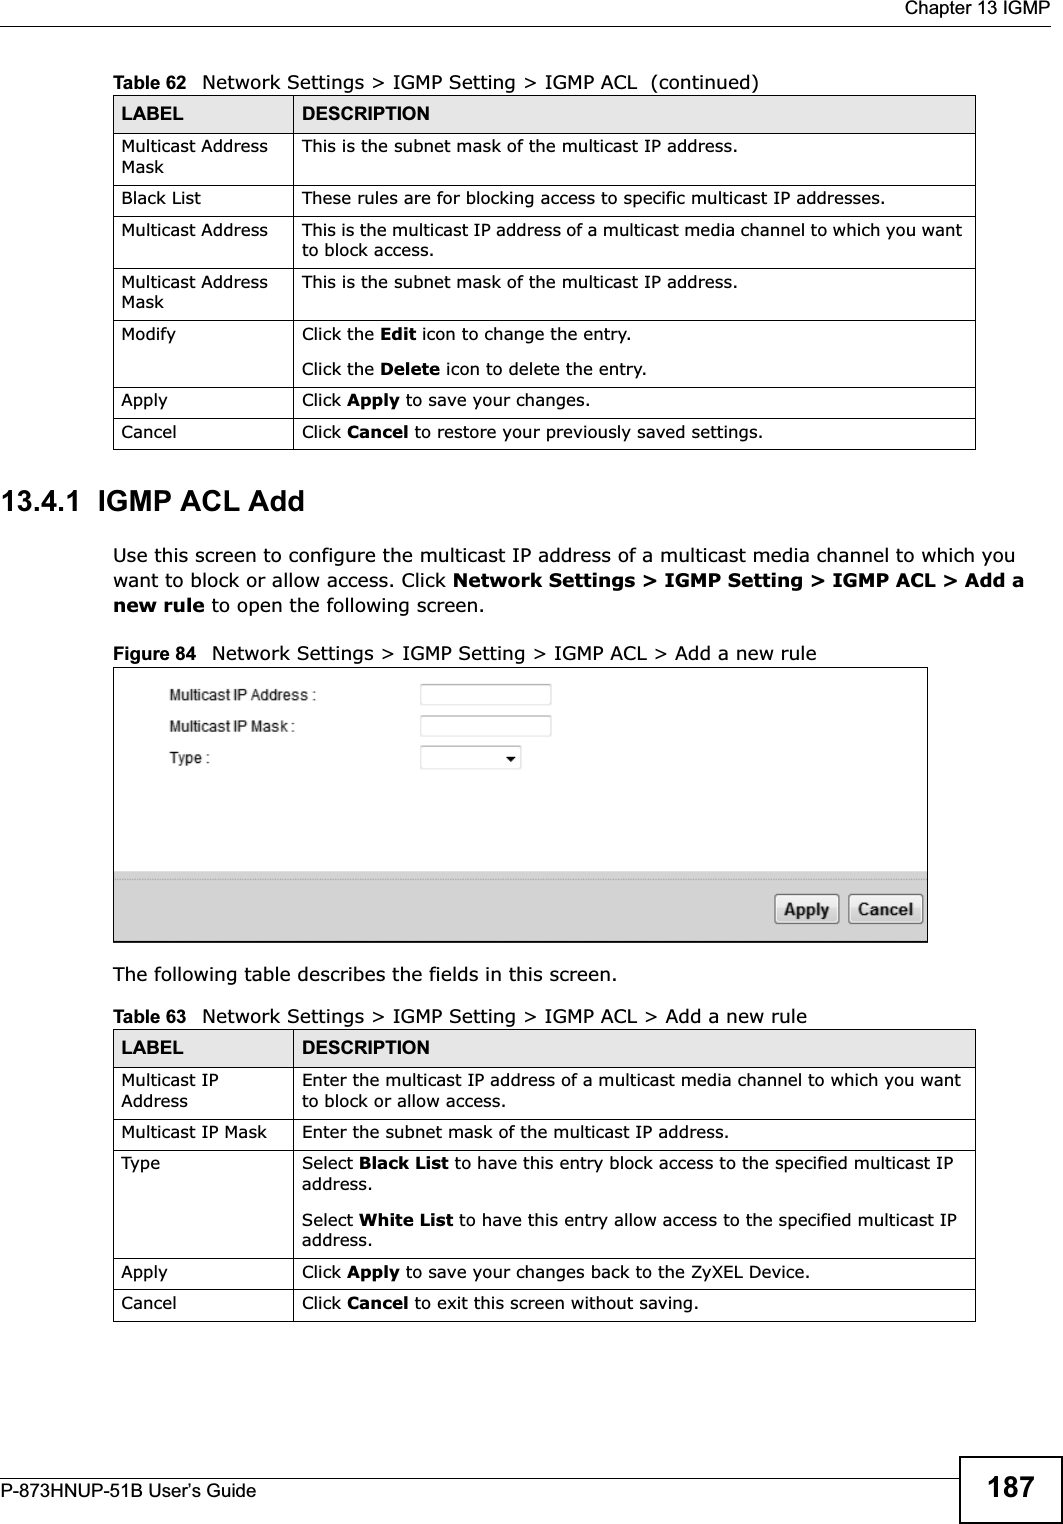  Chapter 13 IGMPP-873HNUP-51B User’s Guide 18713.4.1  IGMP ACL AddUse this screen to configure the multicast IP address of a multicast media channel to which you want to block or allow access. Click Network Settings &gt; IGMP Setting &gt; IGMP ACL &gt; Add a new rule to open the following screen. Figure 84   Network Settings &gt; IGMP Setting &gt; IGMP ACL &gt; Add a new rule The following table describes the fields in this screen.Multicast Address MaskThis is the subnet mask of the multicast IP address.Black List These rules are for blocking access to specific multicast IP addresses.Multicast Address This is the multicast IP address of a multicast media channel to which you want to block access.Multicast Address MaskThis is the subnet mask of the multicast IP address.Modify Click the Edit icon to change the entry.Click the Delete icon to delete the entry.Apply Click Apply to save your changes.Cancel Click Cancel to restore your previously saved settings.Table 62   Network Settings &gt; IGMP Setting &gt; IGMP ACL  (continued)LABEL DESCRIPTIONTable 63   Network Settings &gt; IGMP Setting &gt; IGMP ACL &gt; Add a new rule LABEL DESCRIPTIONMulticast IP AddressEnter the multicast IP address of a multicast media channel to which you want to block or allow access.Multicast IP Mask Enter the subnet mask of the multicast IP address.Type Select Black List to have this entry block access to the specified multicast IP address.Select White List to have this entry allow access to the specified multicast IP address.Apply Click Apply to save your changes back to the ZyXEL Device.Cancel Click Cancel to exit this screen without saving.